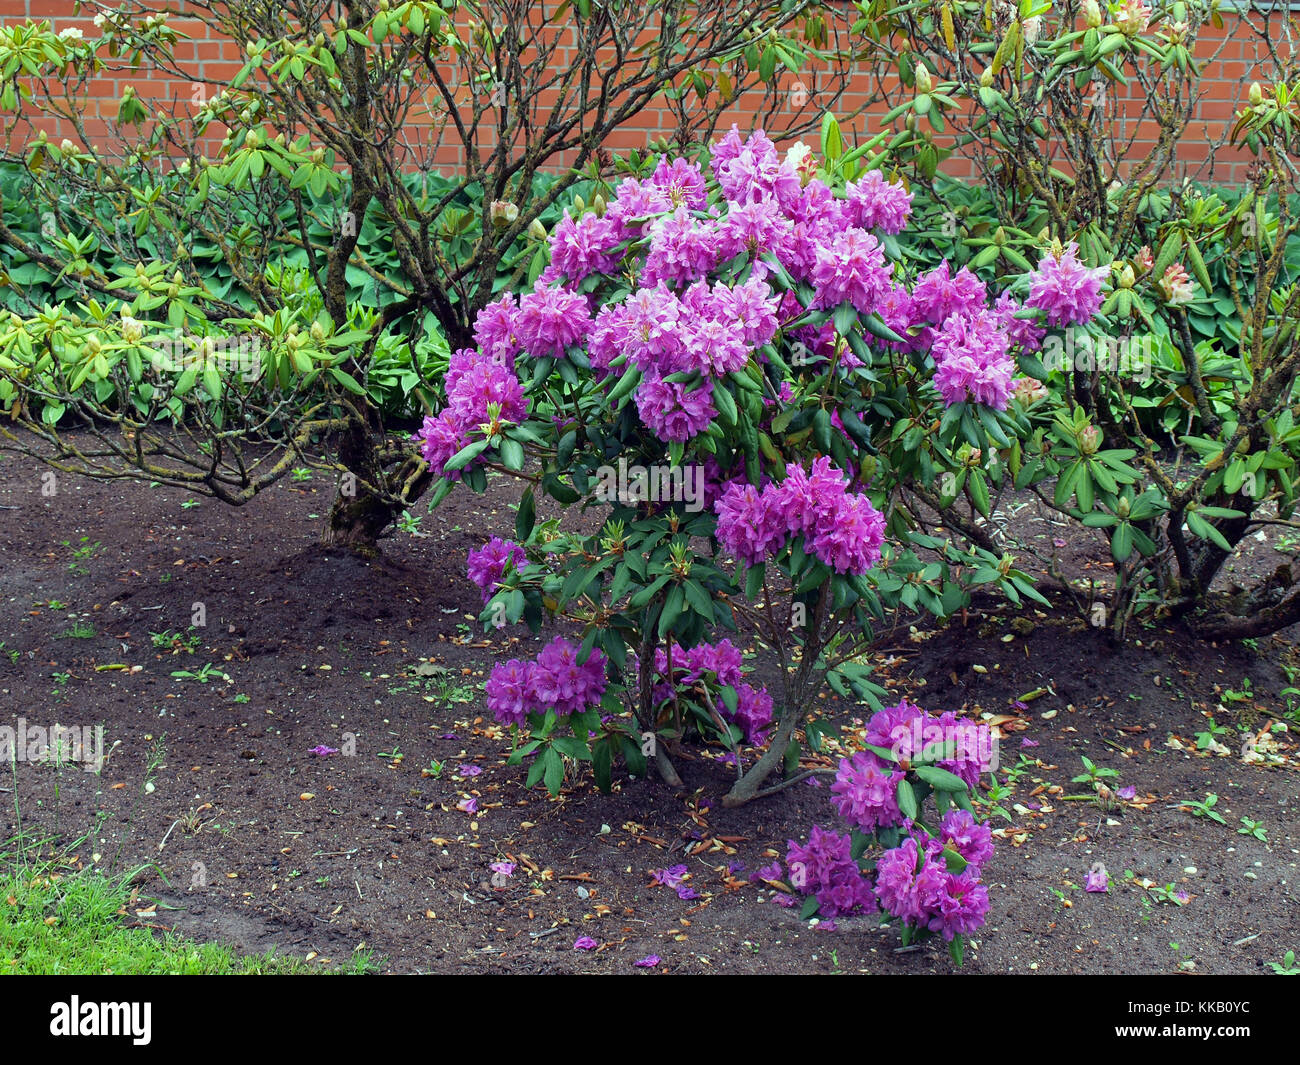 Rhododendron bush in flower bed with reddish purple blossoms Stock Photo